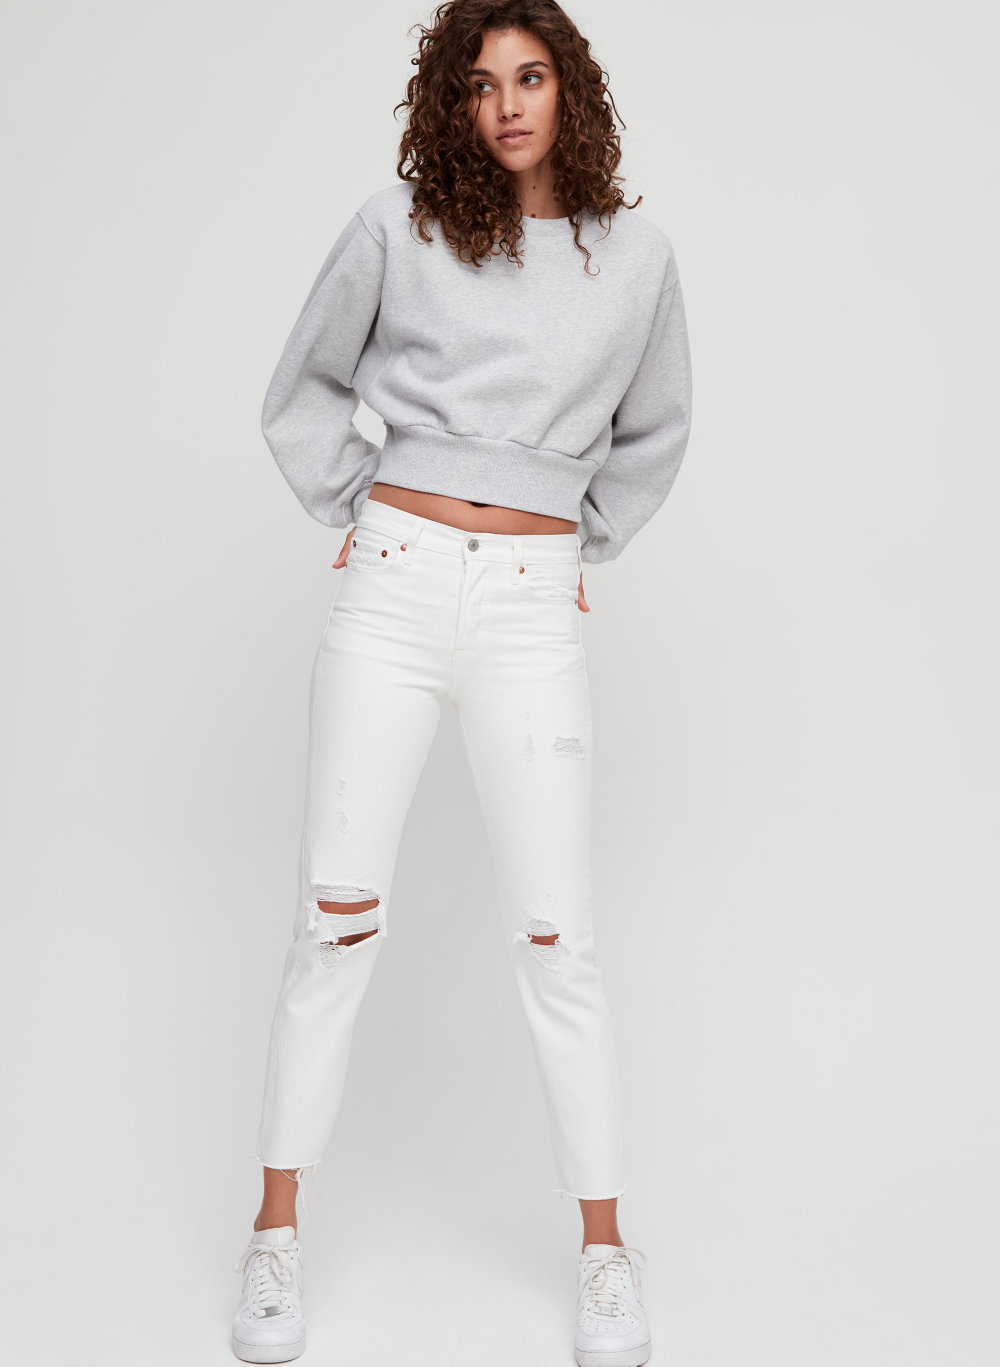 white ripped levi jeans